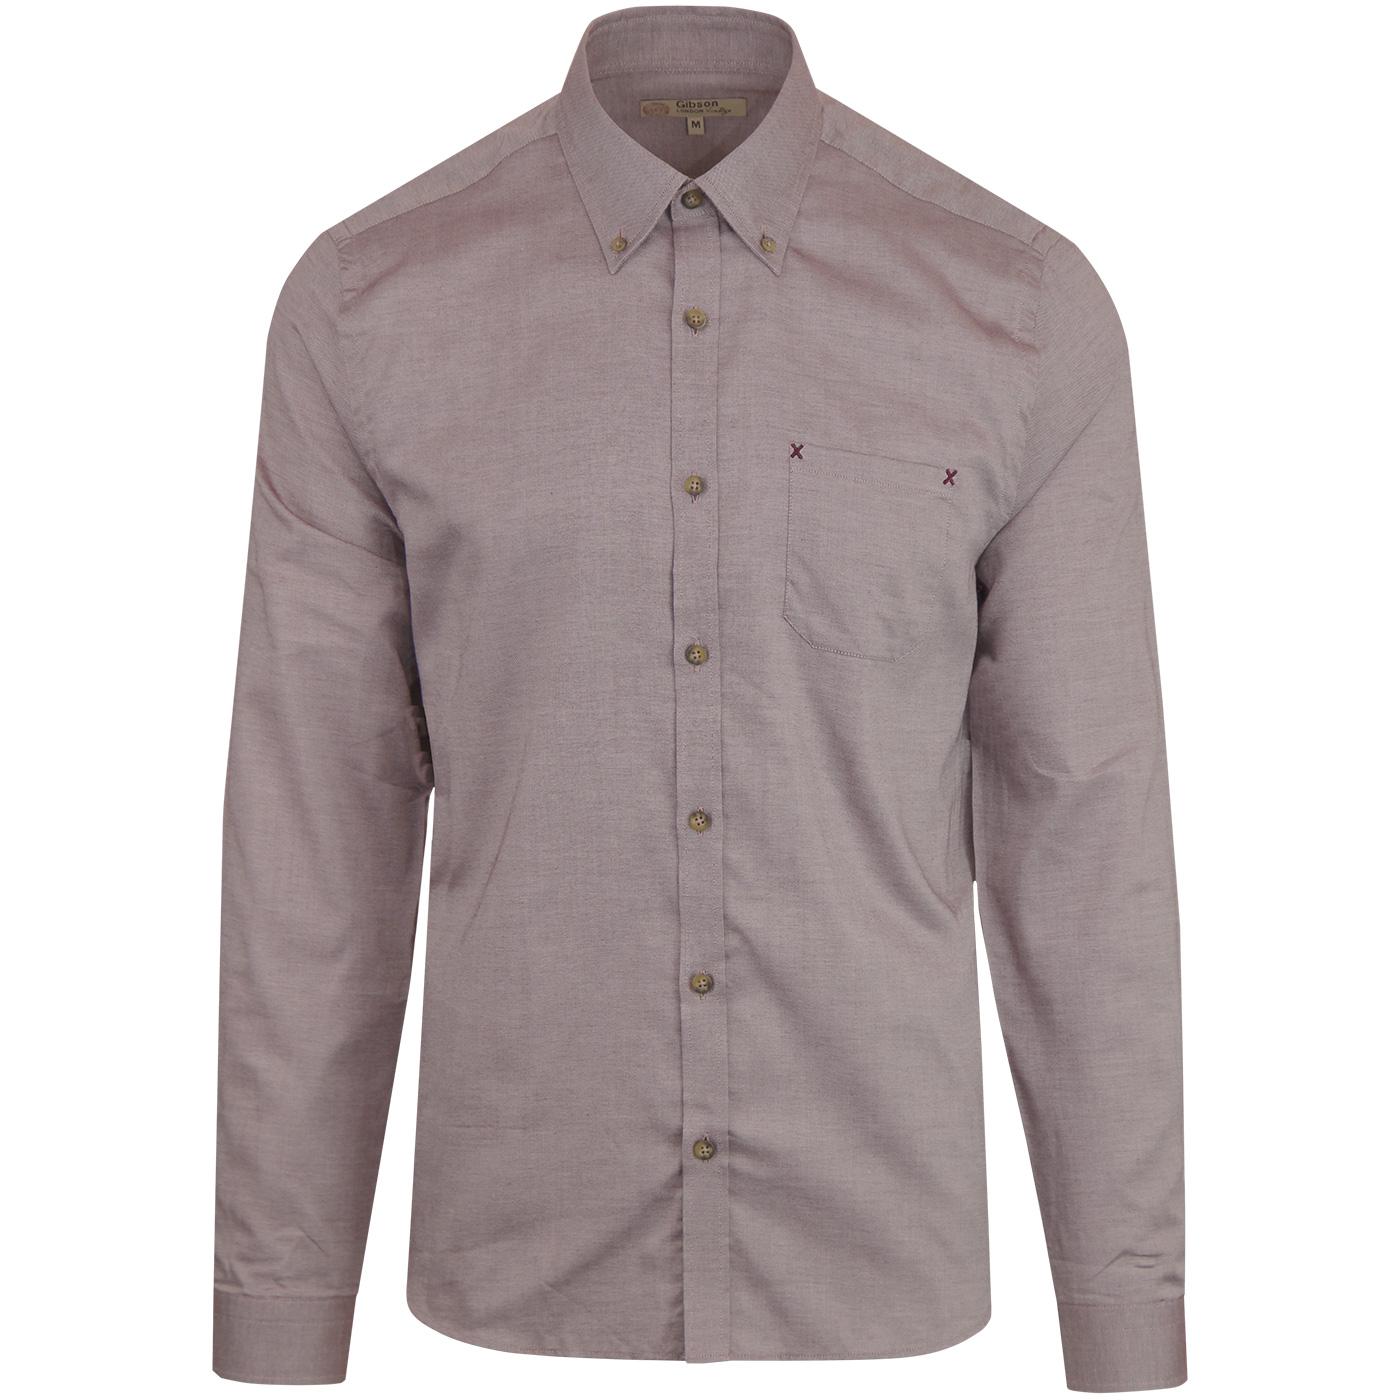 GIBSON LONDON Mens Retro Smart Oxford Shirt in Berry